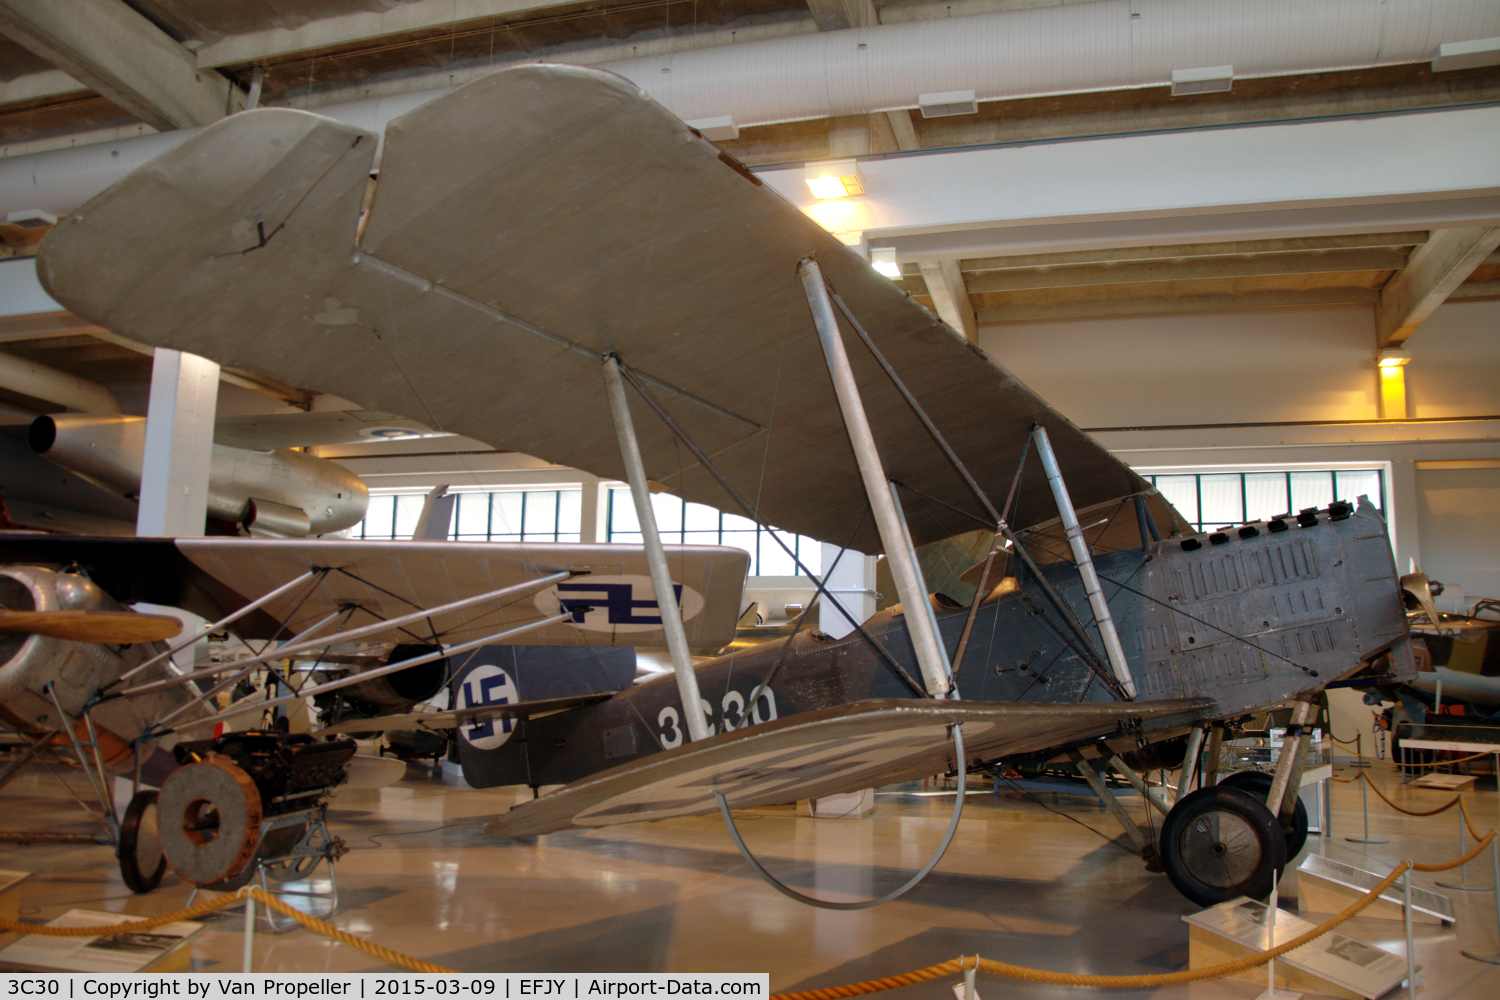 3C30, Breguet 14A2 C/N Not found 3C30, Breguet 14 A.2 of the Finnish Air Force preserved at the Aviation Museum of Central Finland at Tikkakoski.